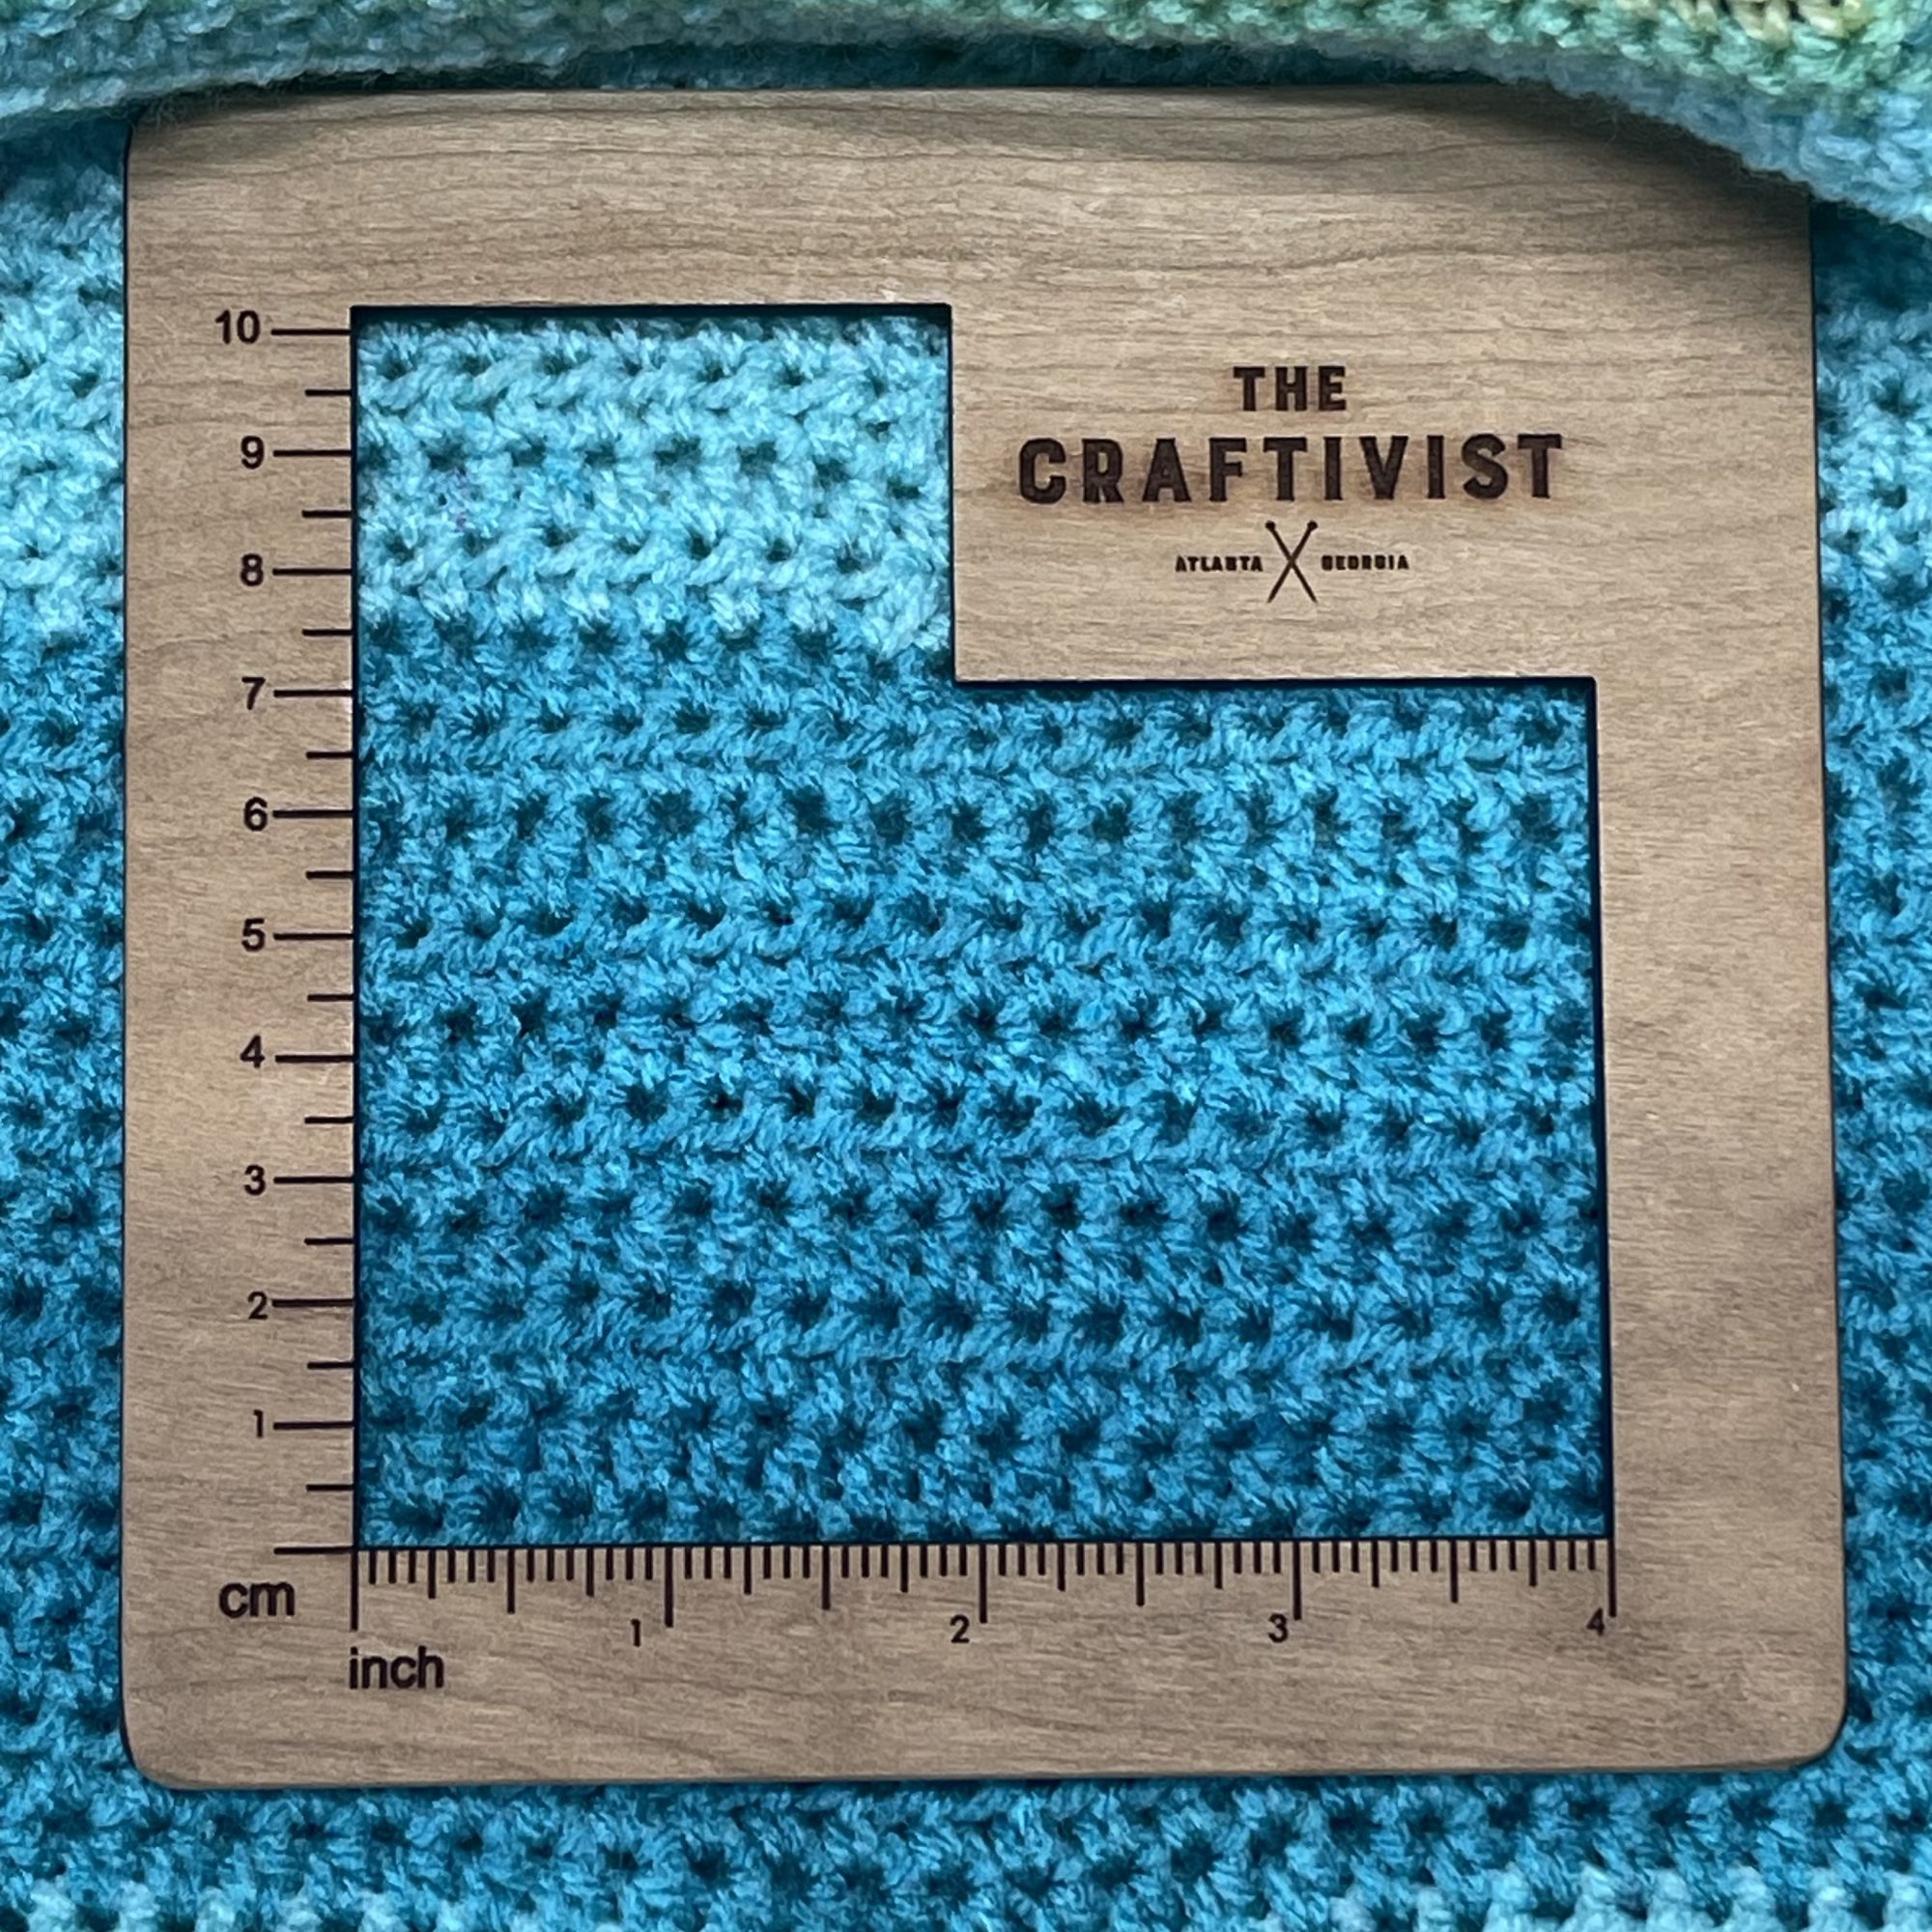 A wood gauge square with inches indicated on the lower side and centimeters listed on the left side. It is laying on top of a crochet fabric made with turquoise yarn to show crochet gauge.